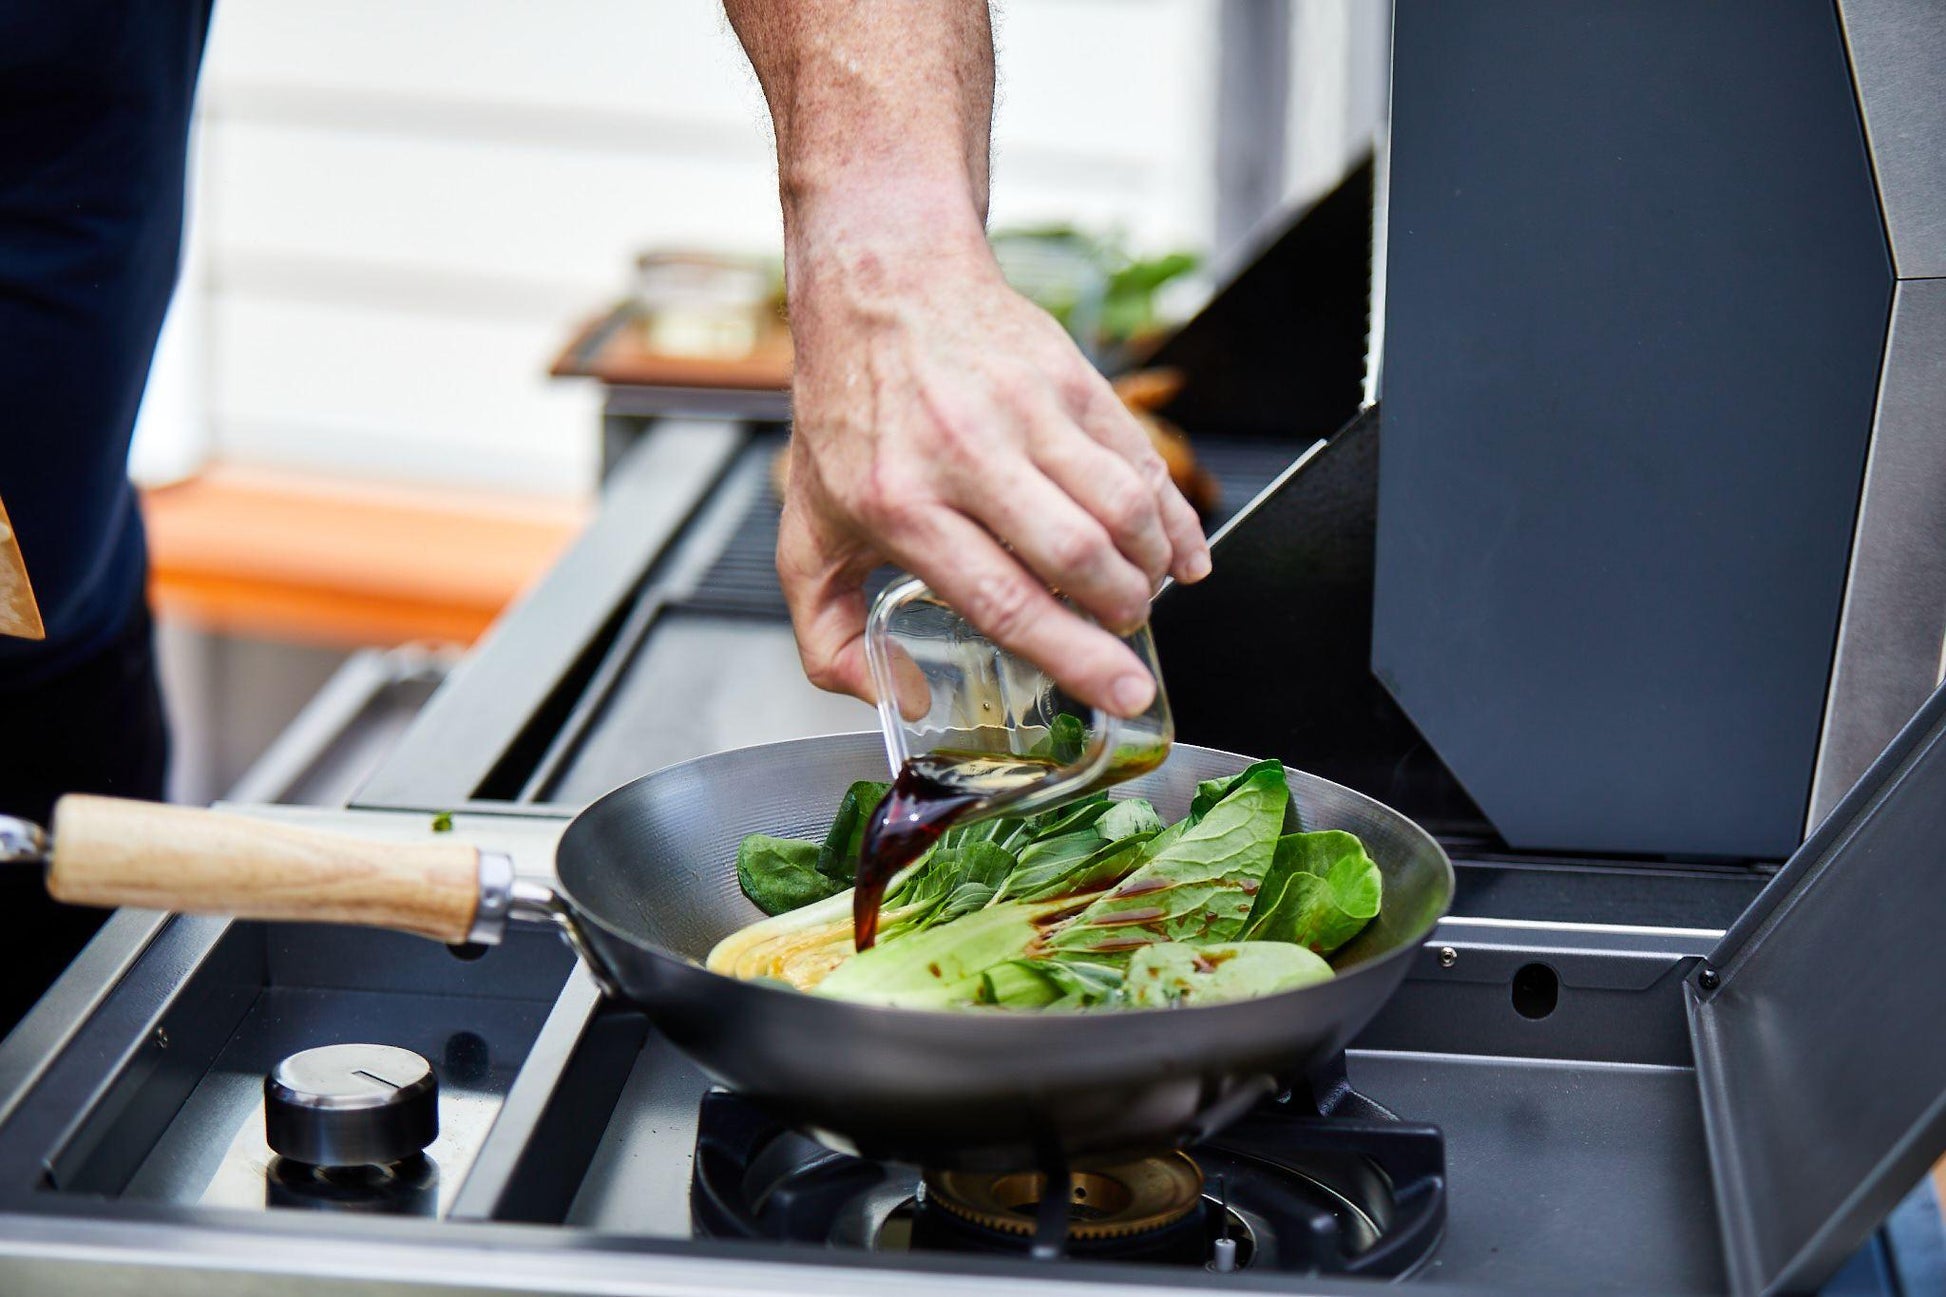 A person pours soy sauce from a small glass container into a wok filled with vegetables, including bok choy and green onions. The wok sits atop the sleek BeefEater 1500 Series 3 Burner BBQ & Trolley from Brisks, making for an outdoor cooking experience in what appears to be a modern kitchen.